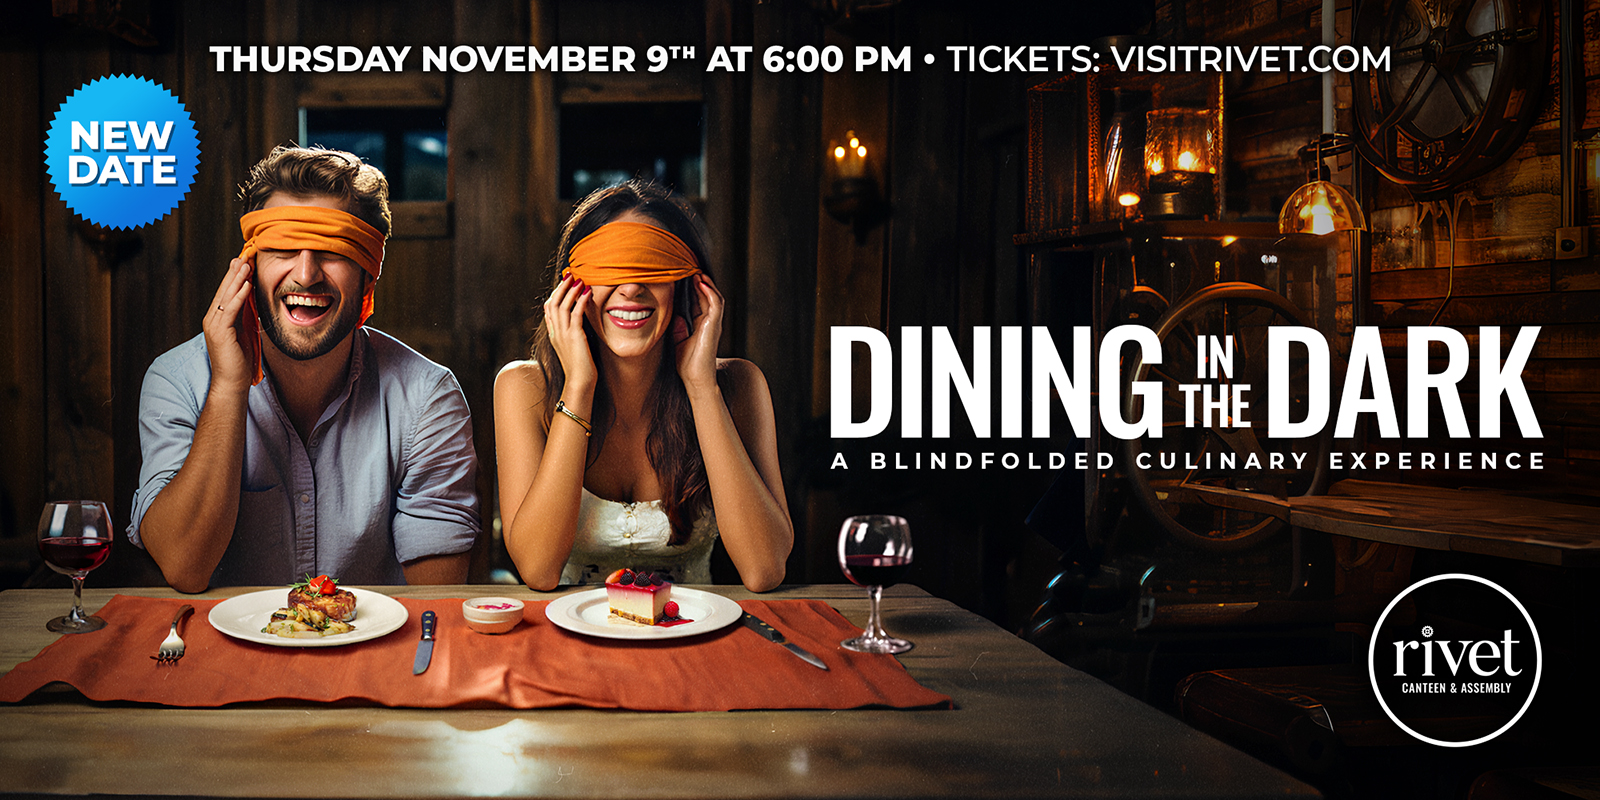 Dining In The Dark, the blindfolded culinary experience at Rivet: Canteen & Assembly on Thursday, November 9th. Doors at 6:00 PM.